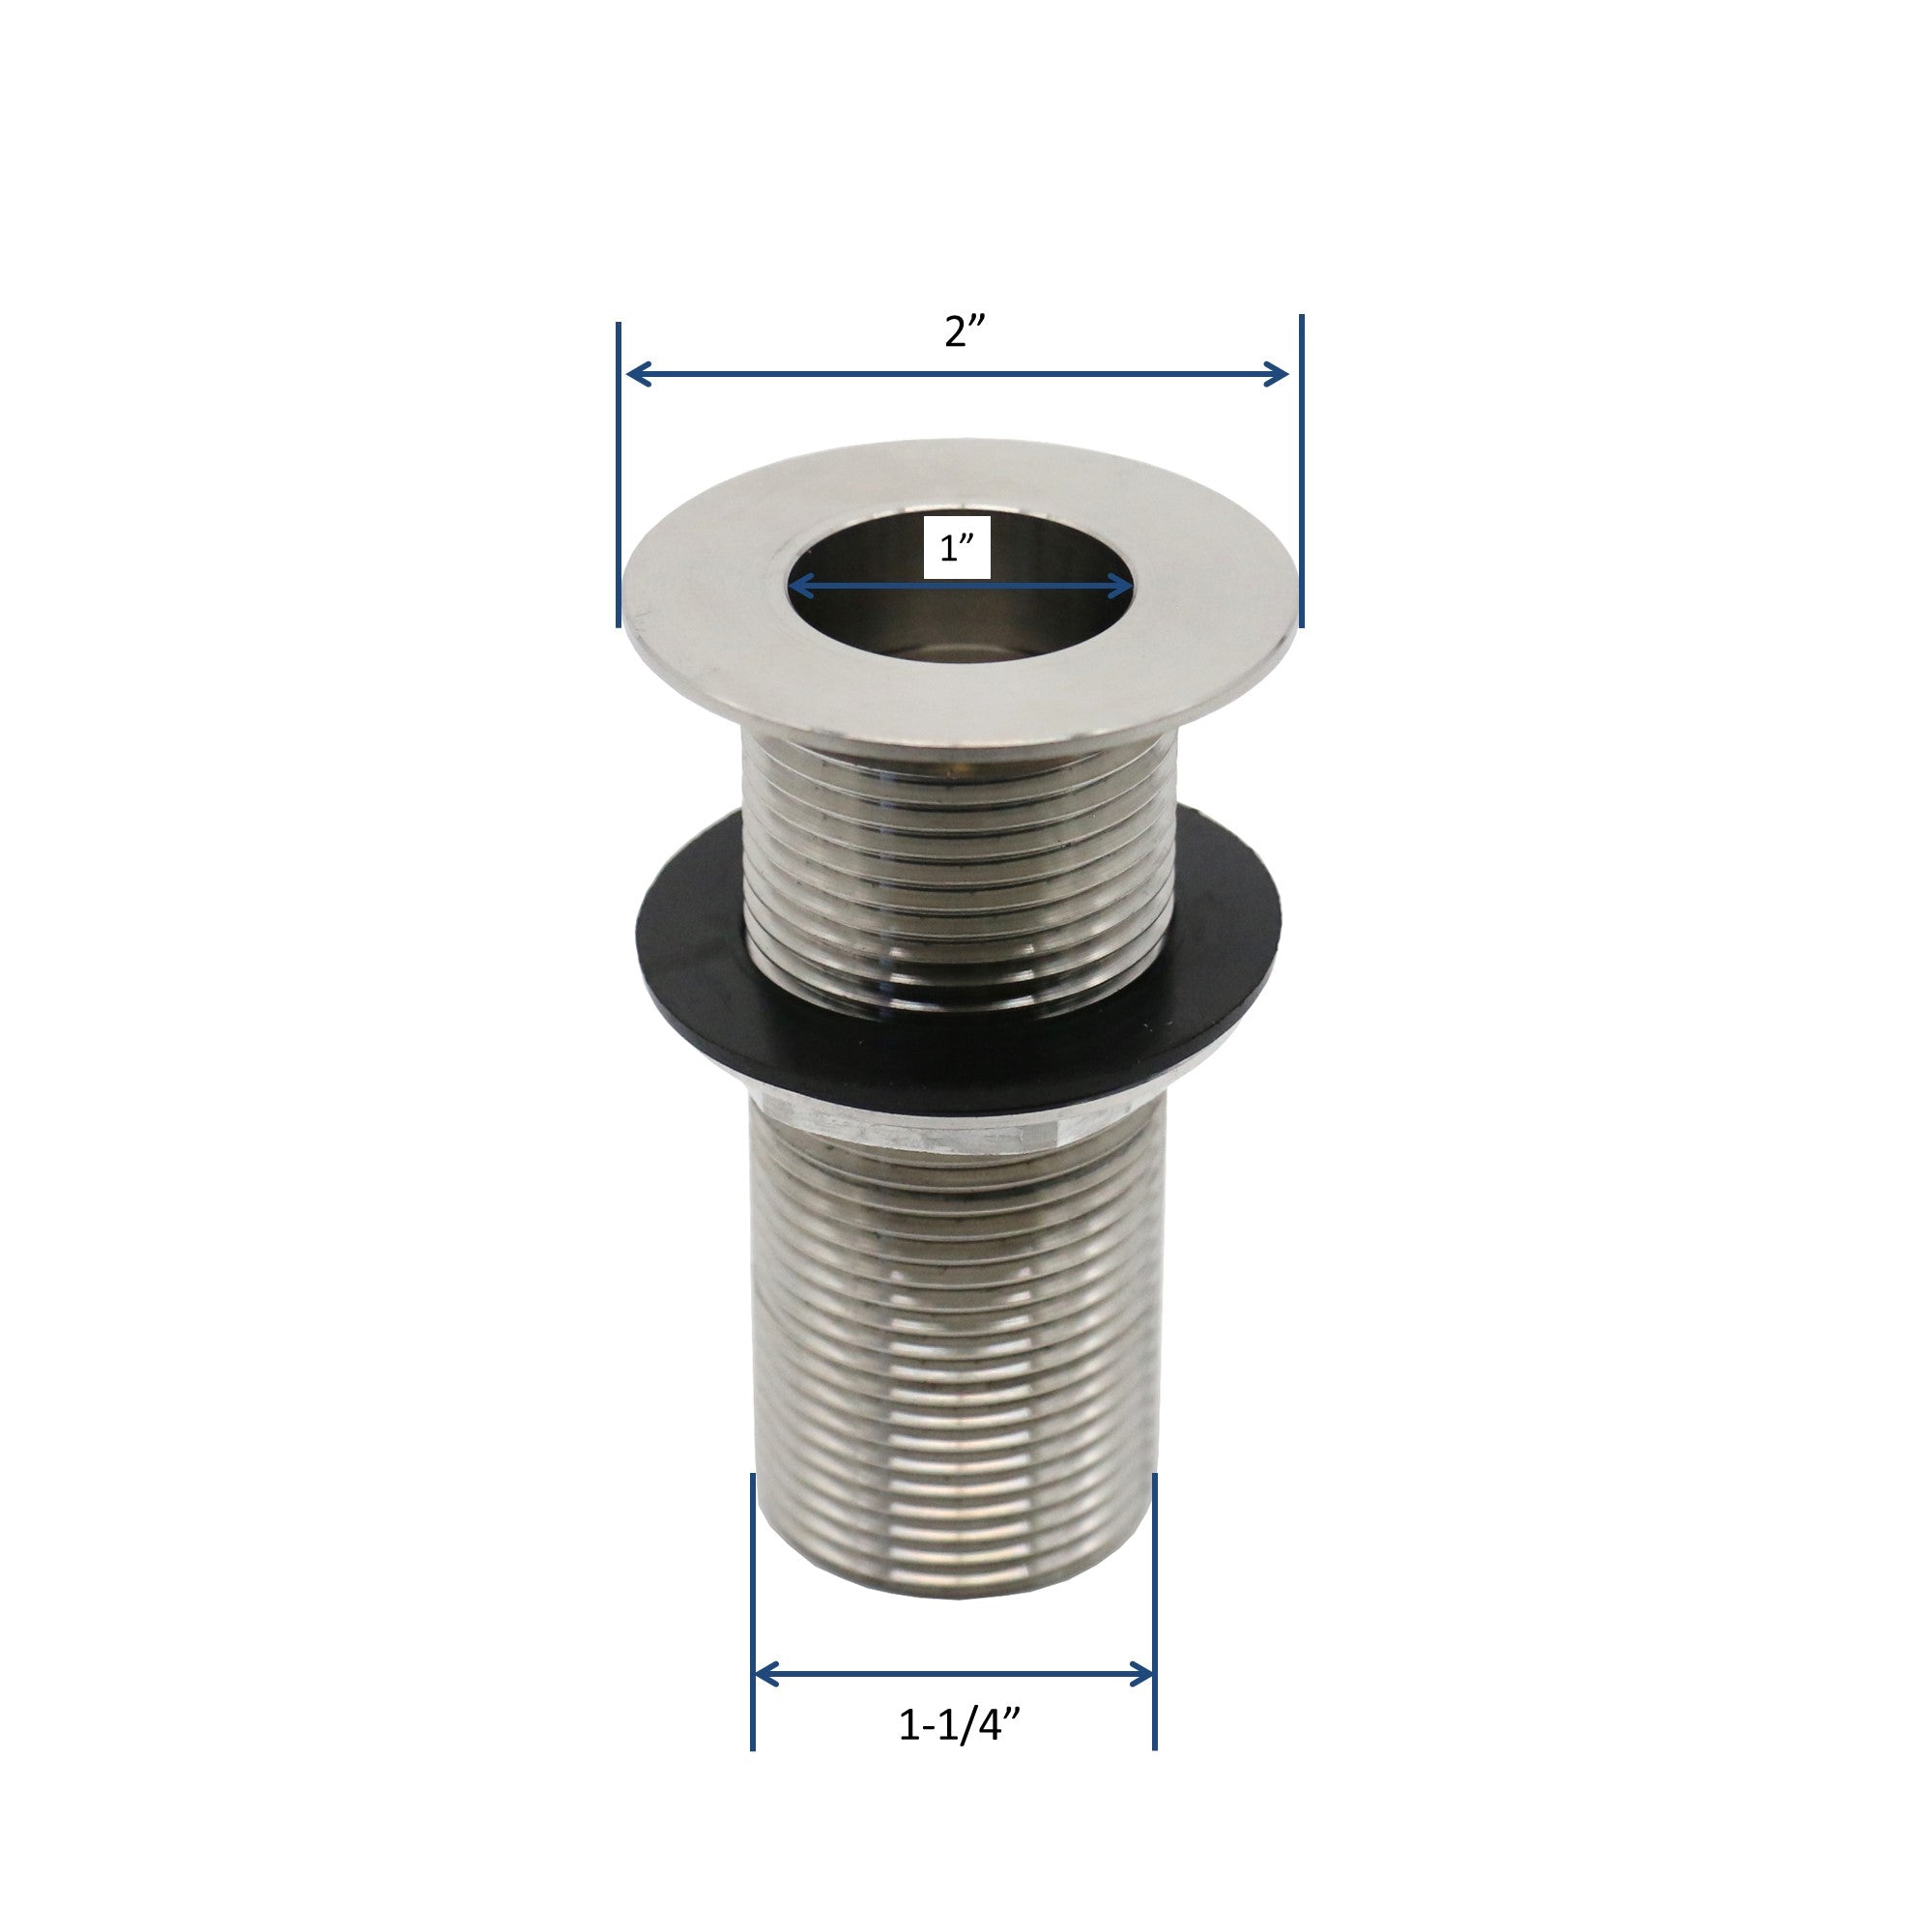 LEYSO Stainless Steel 1" NPS Thread Bar Sink 3-1/4” Drain with Tailpiece for 1-3/8" Sink Opening (7” Combo)